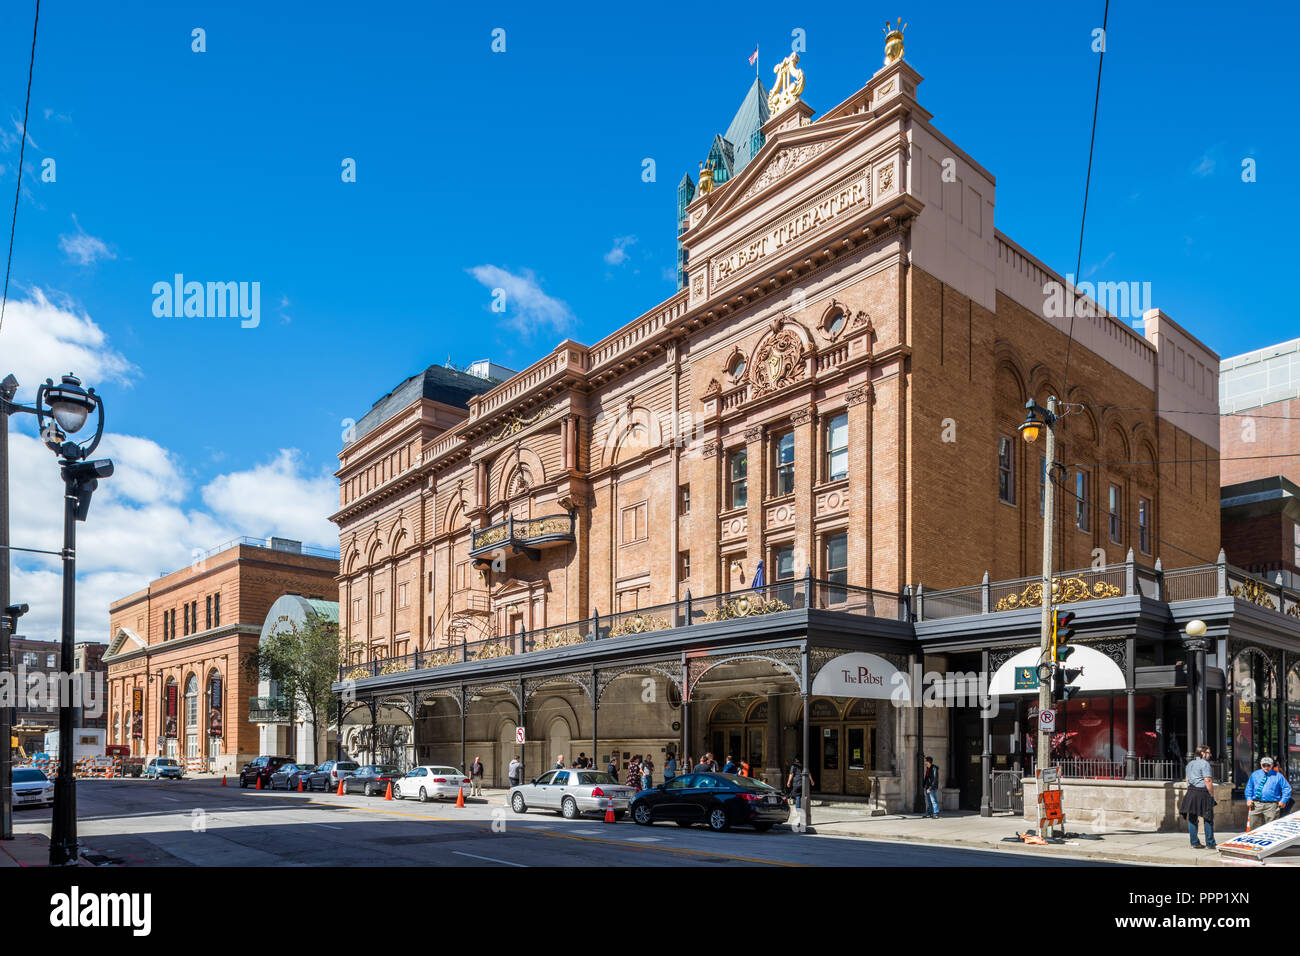 Pabst Theater in Downtown Milwaukee Foto Stock